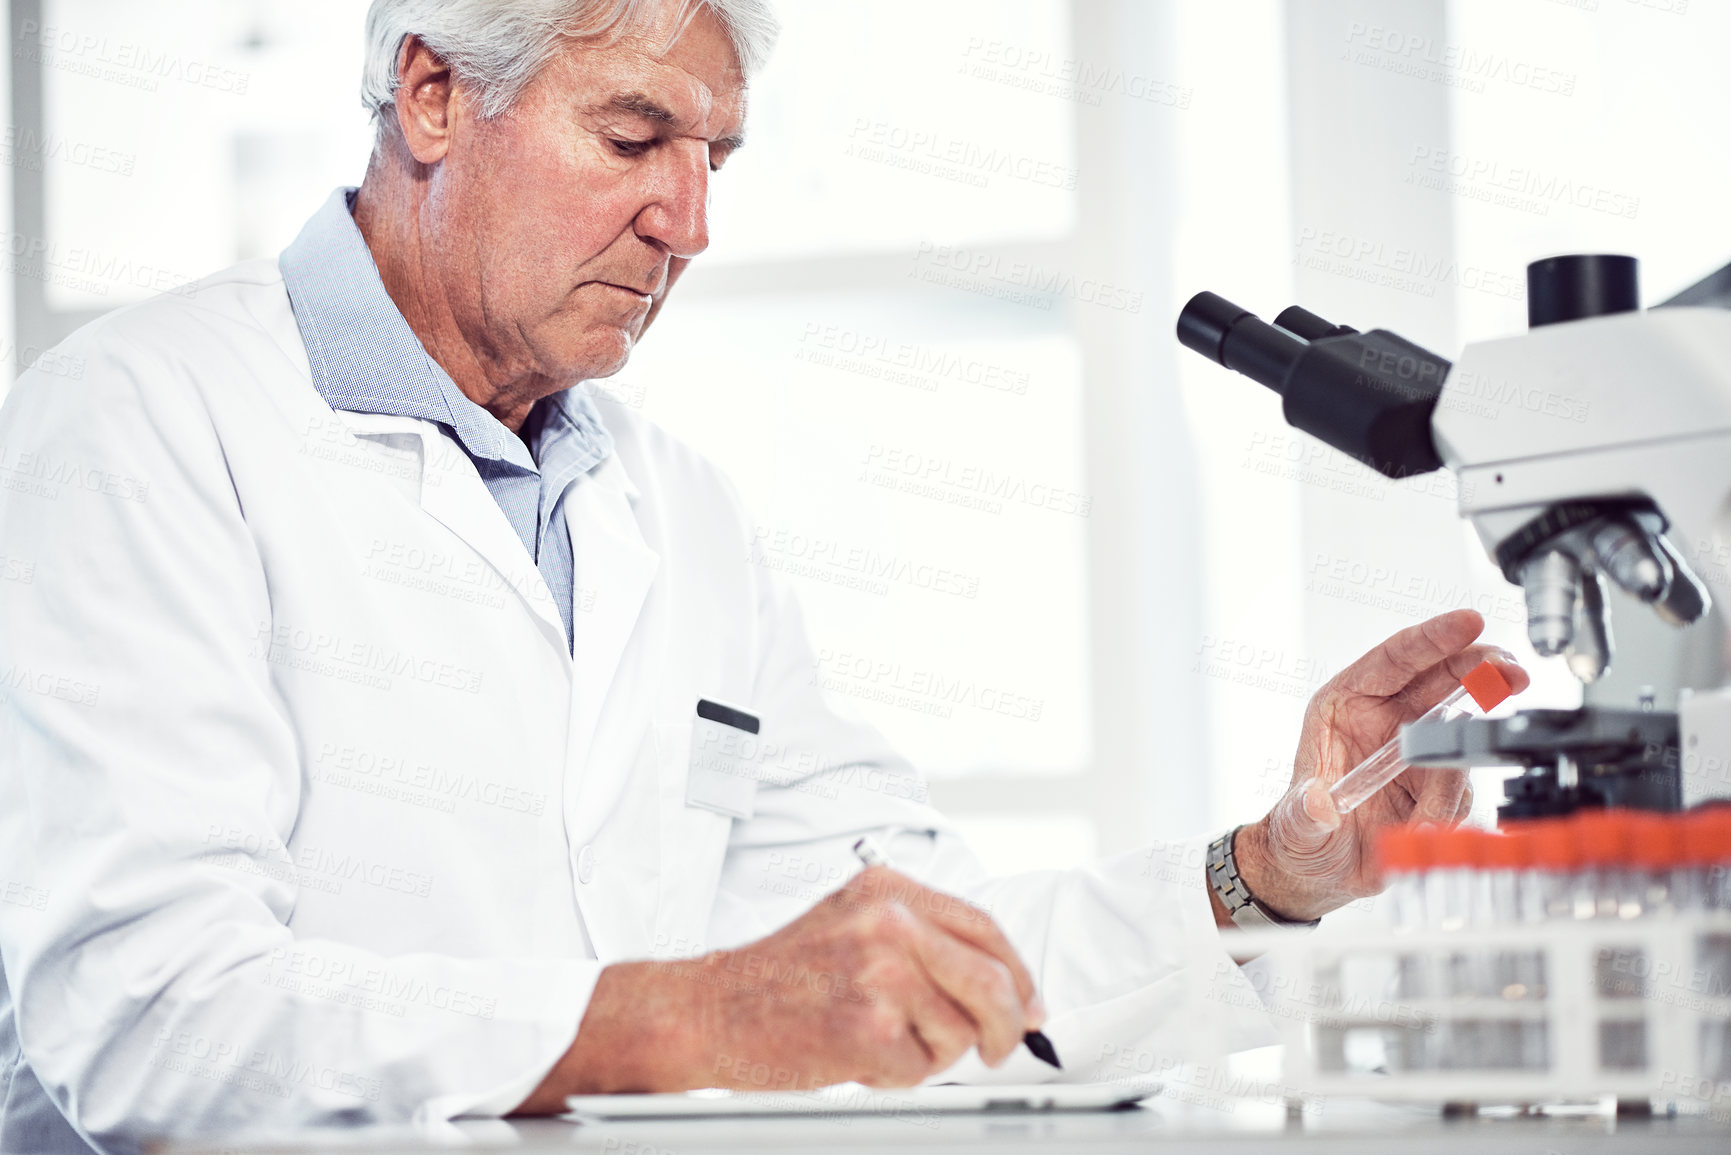 Buy stock photo Shot of a focused elderly male scientist holding up a test tube and making notes while being seated inside of a laboratory